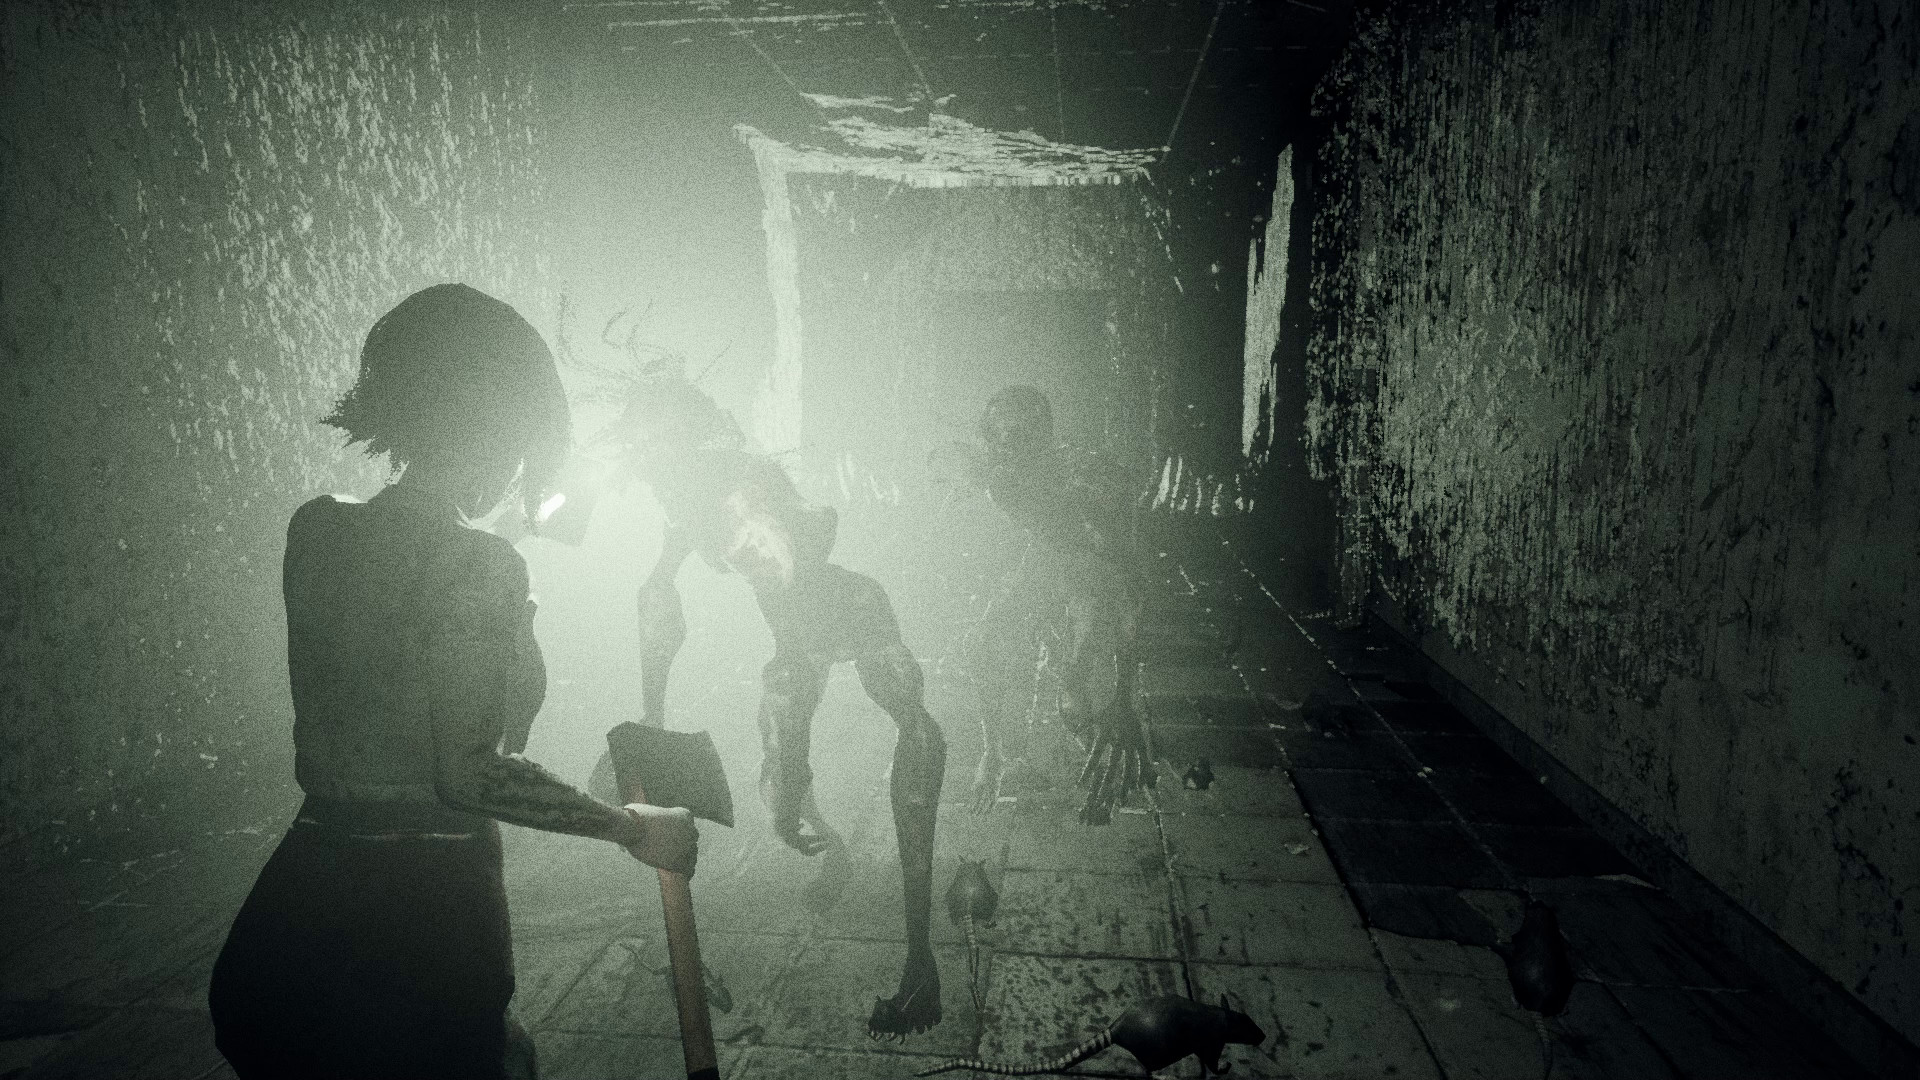 download dreadout 2 steam for free